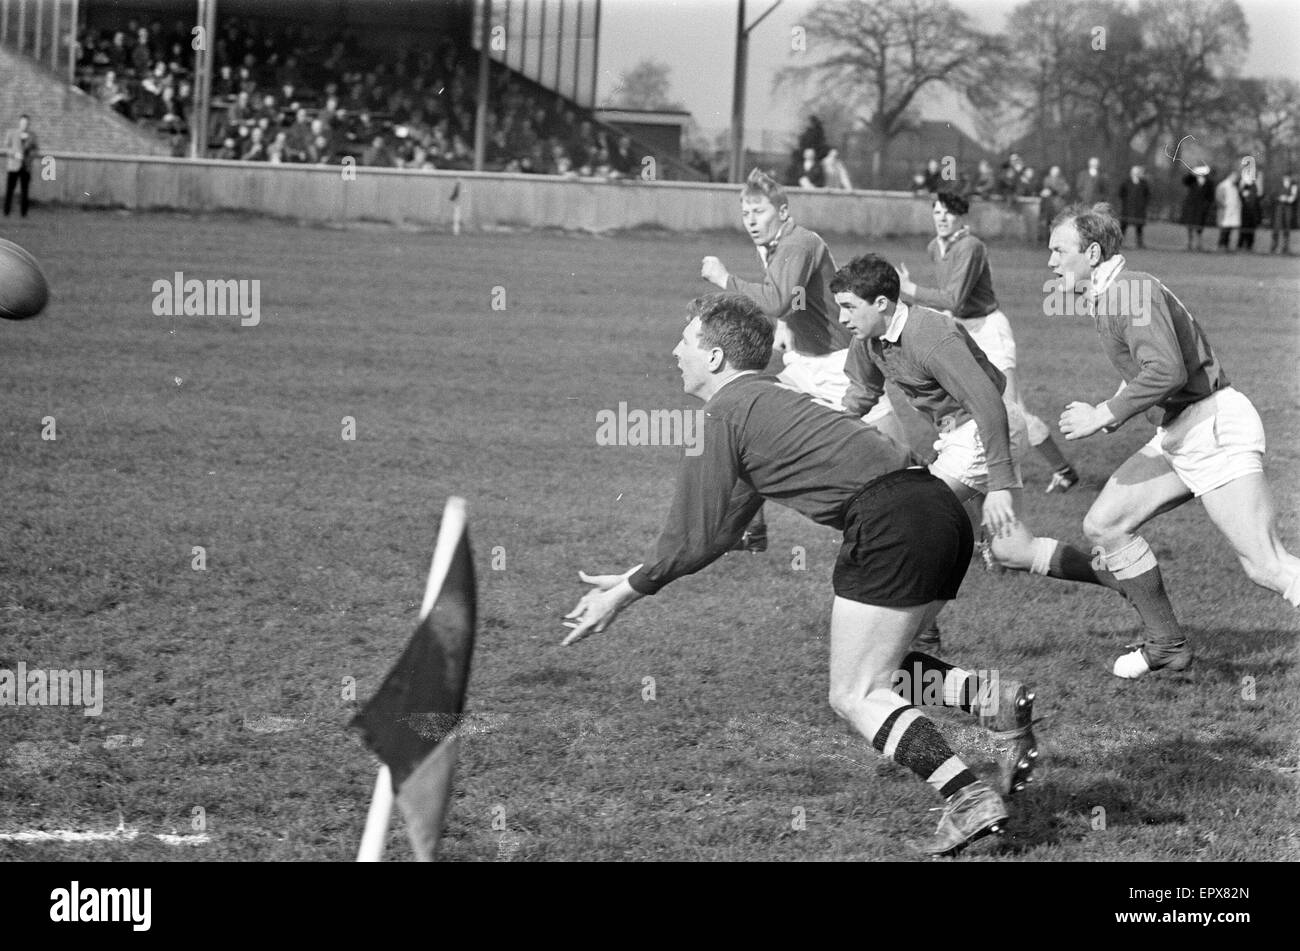 London Wasps v Llanelli, Rugby Union Match, marzo 1966. Foto Stock